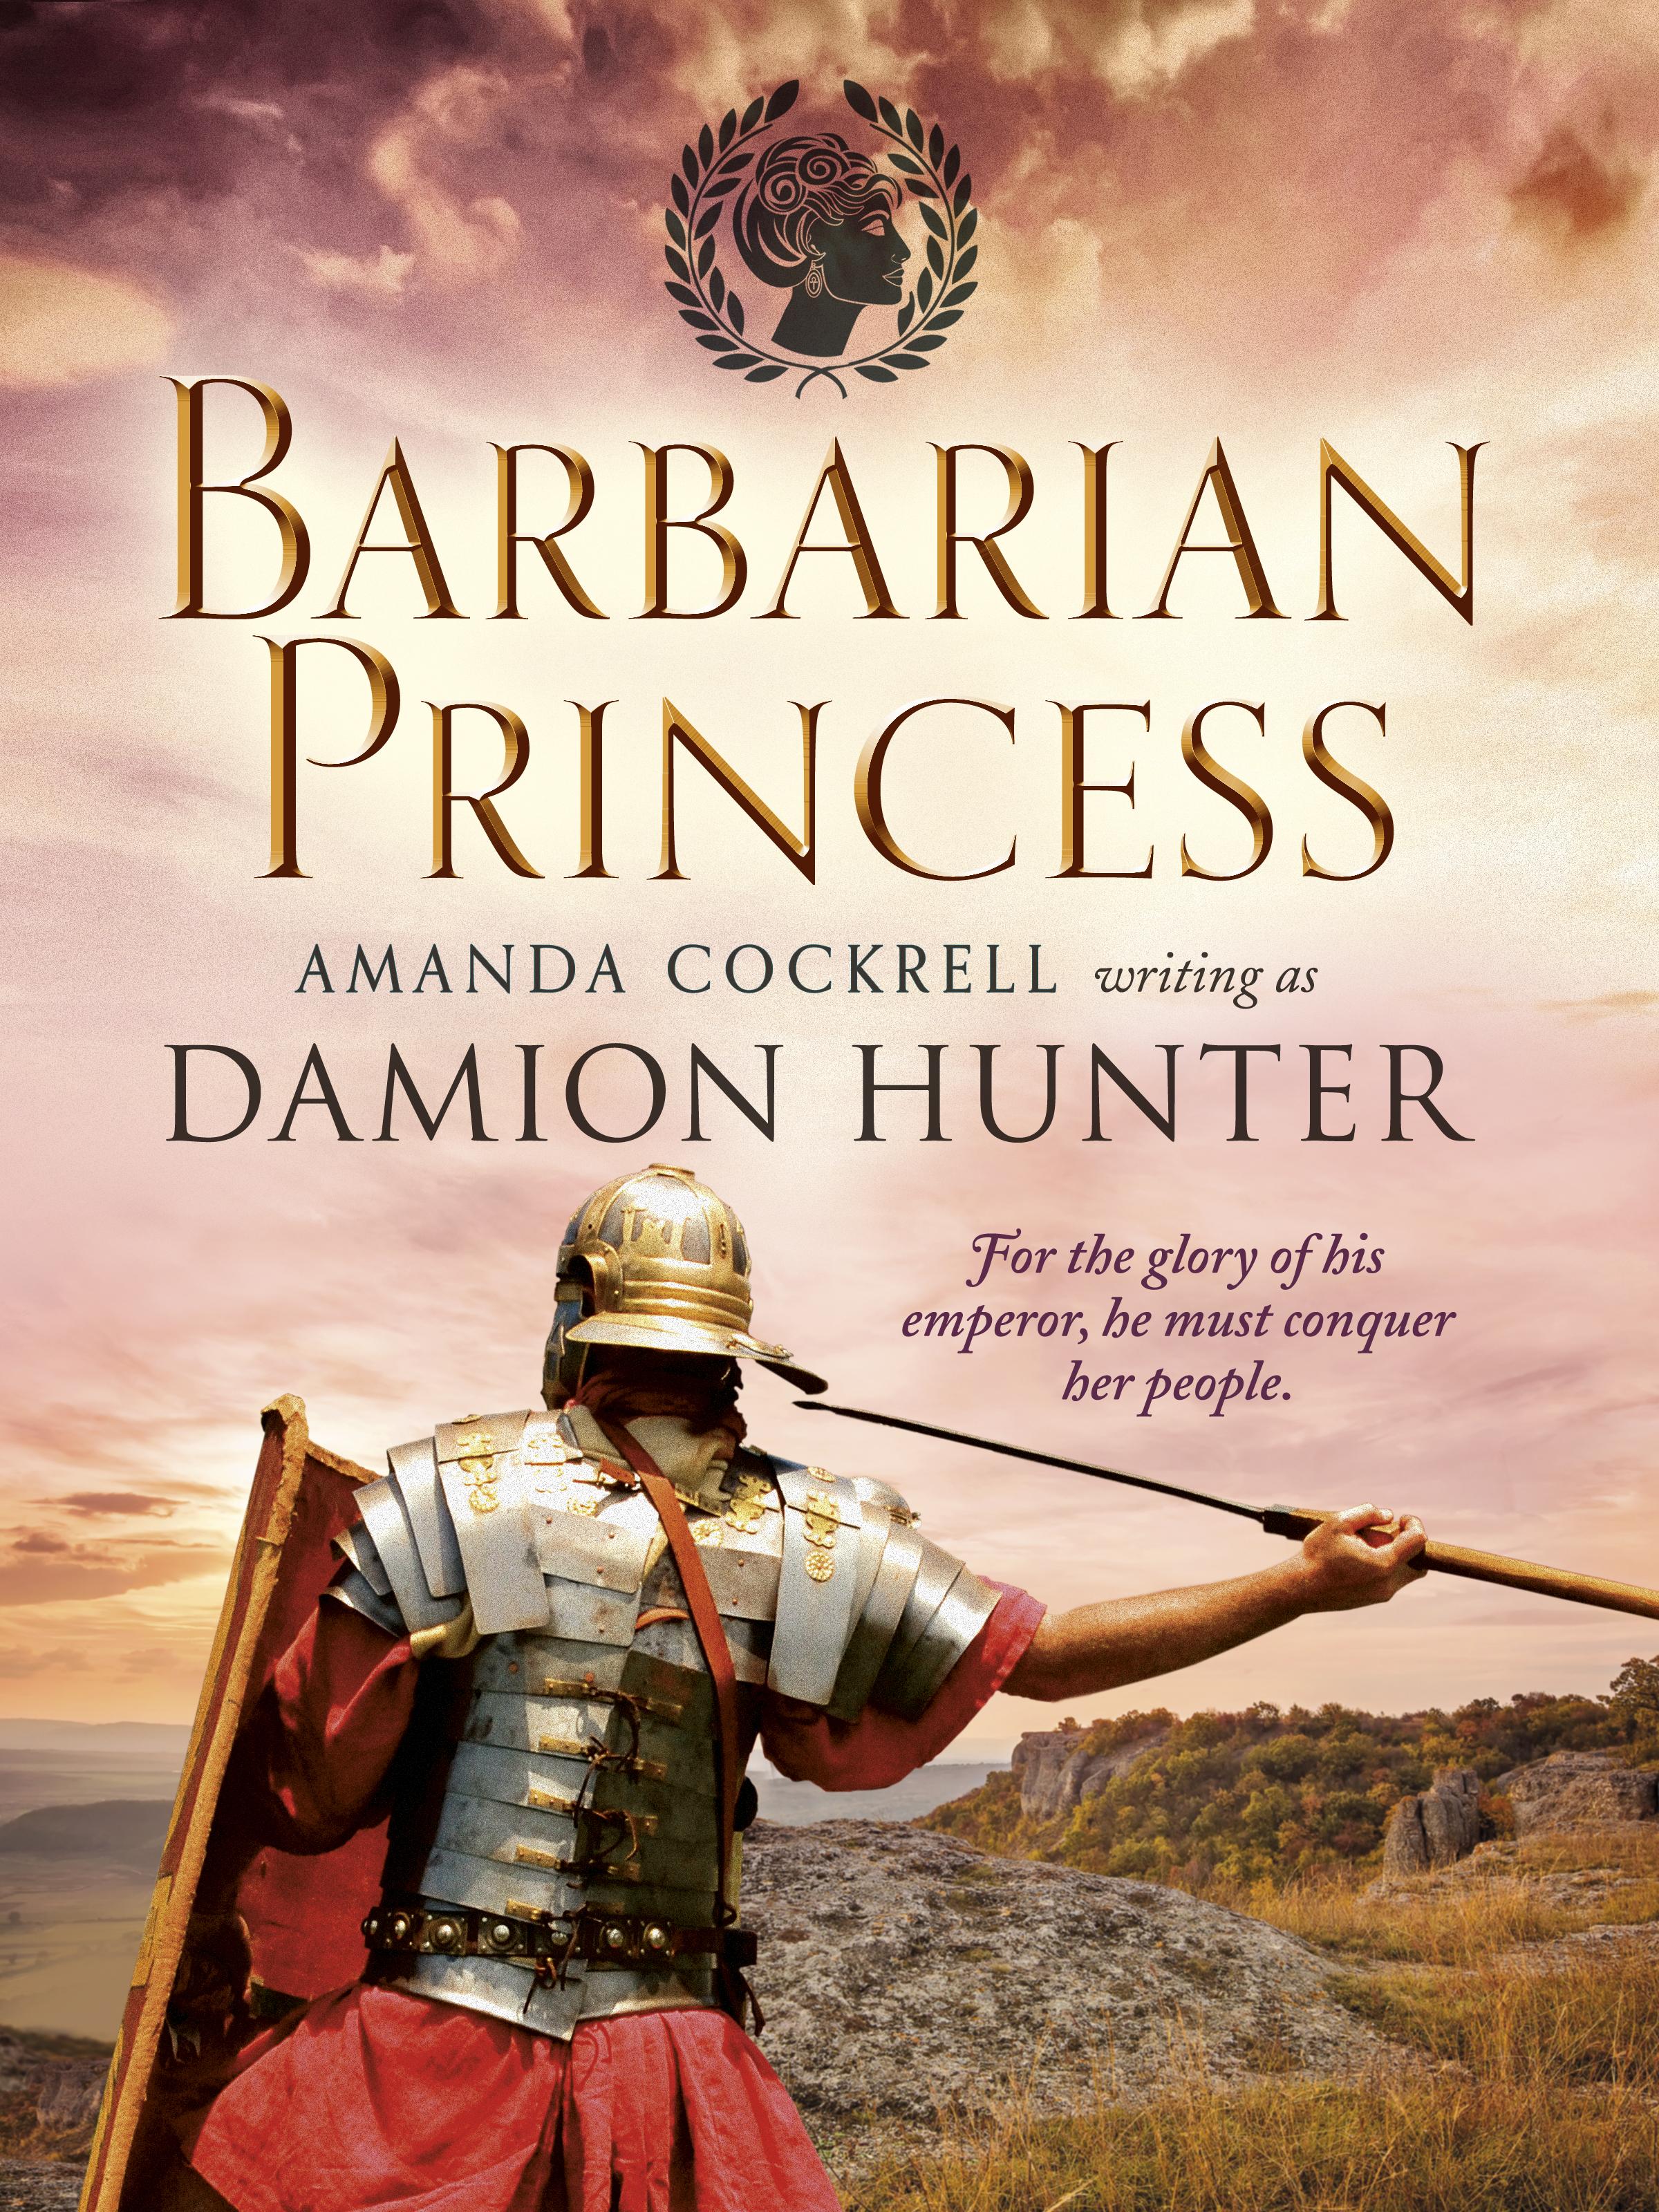 Cover of Barbarian Princess with link to Amazon.